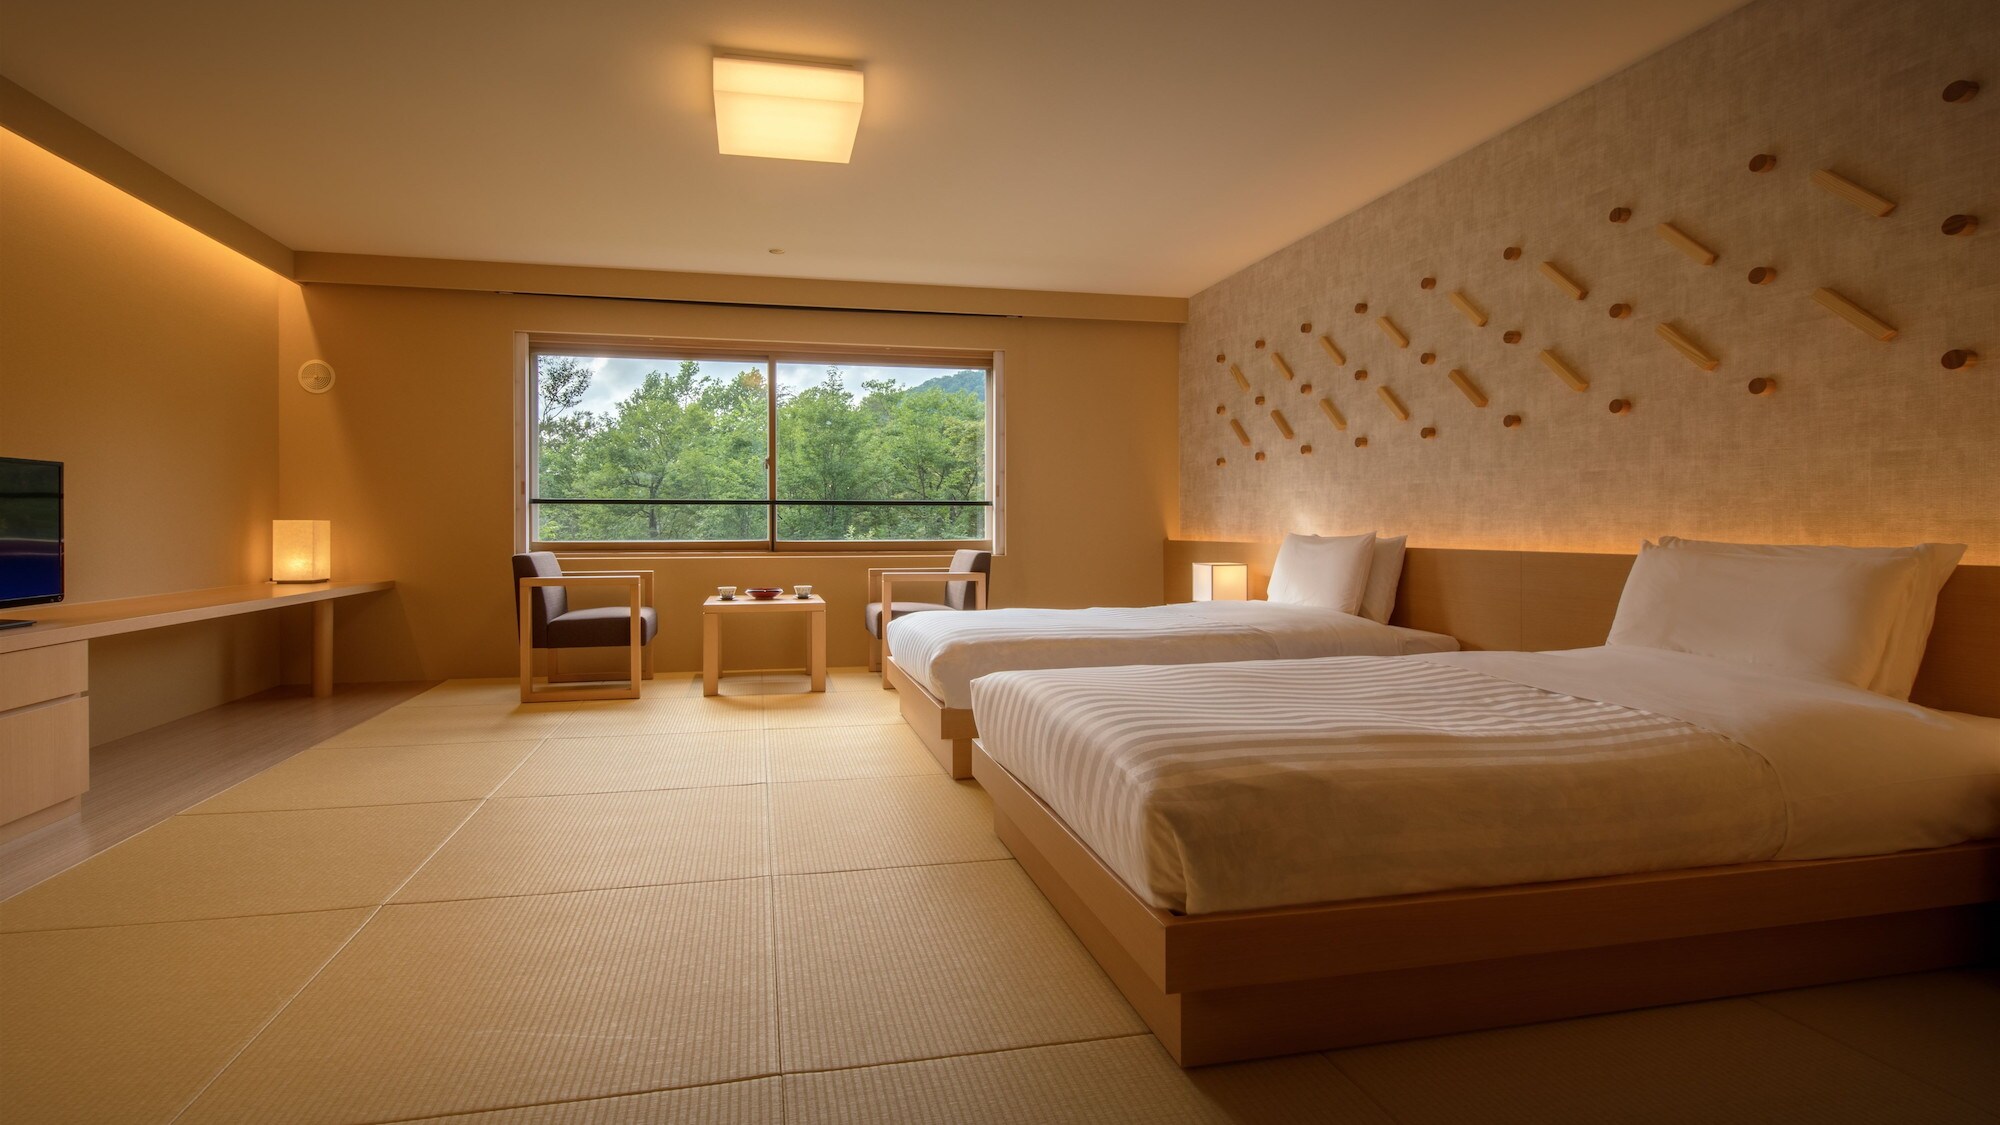 [Renewal Japanese-style twin room] The warmth of wood makes the interior comfortable and relaxing.